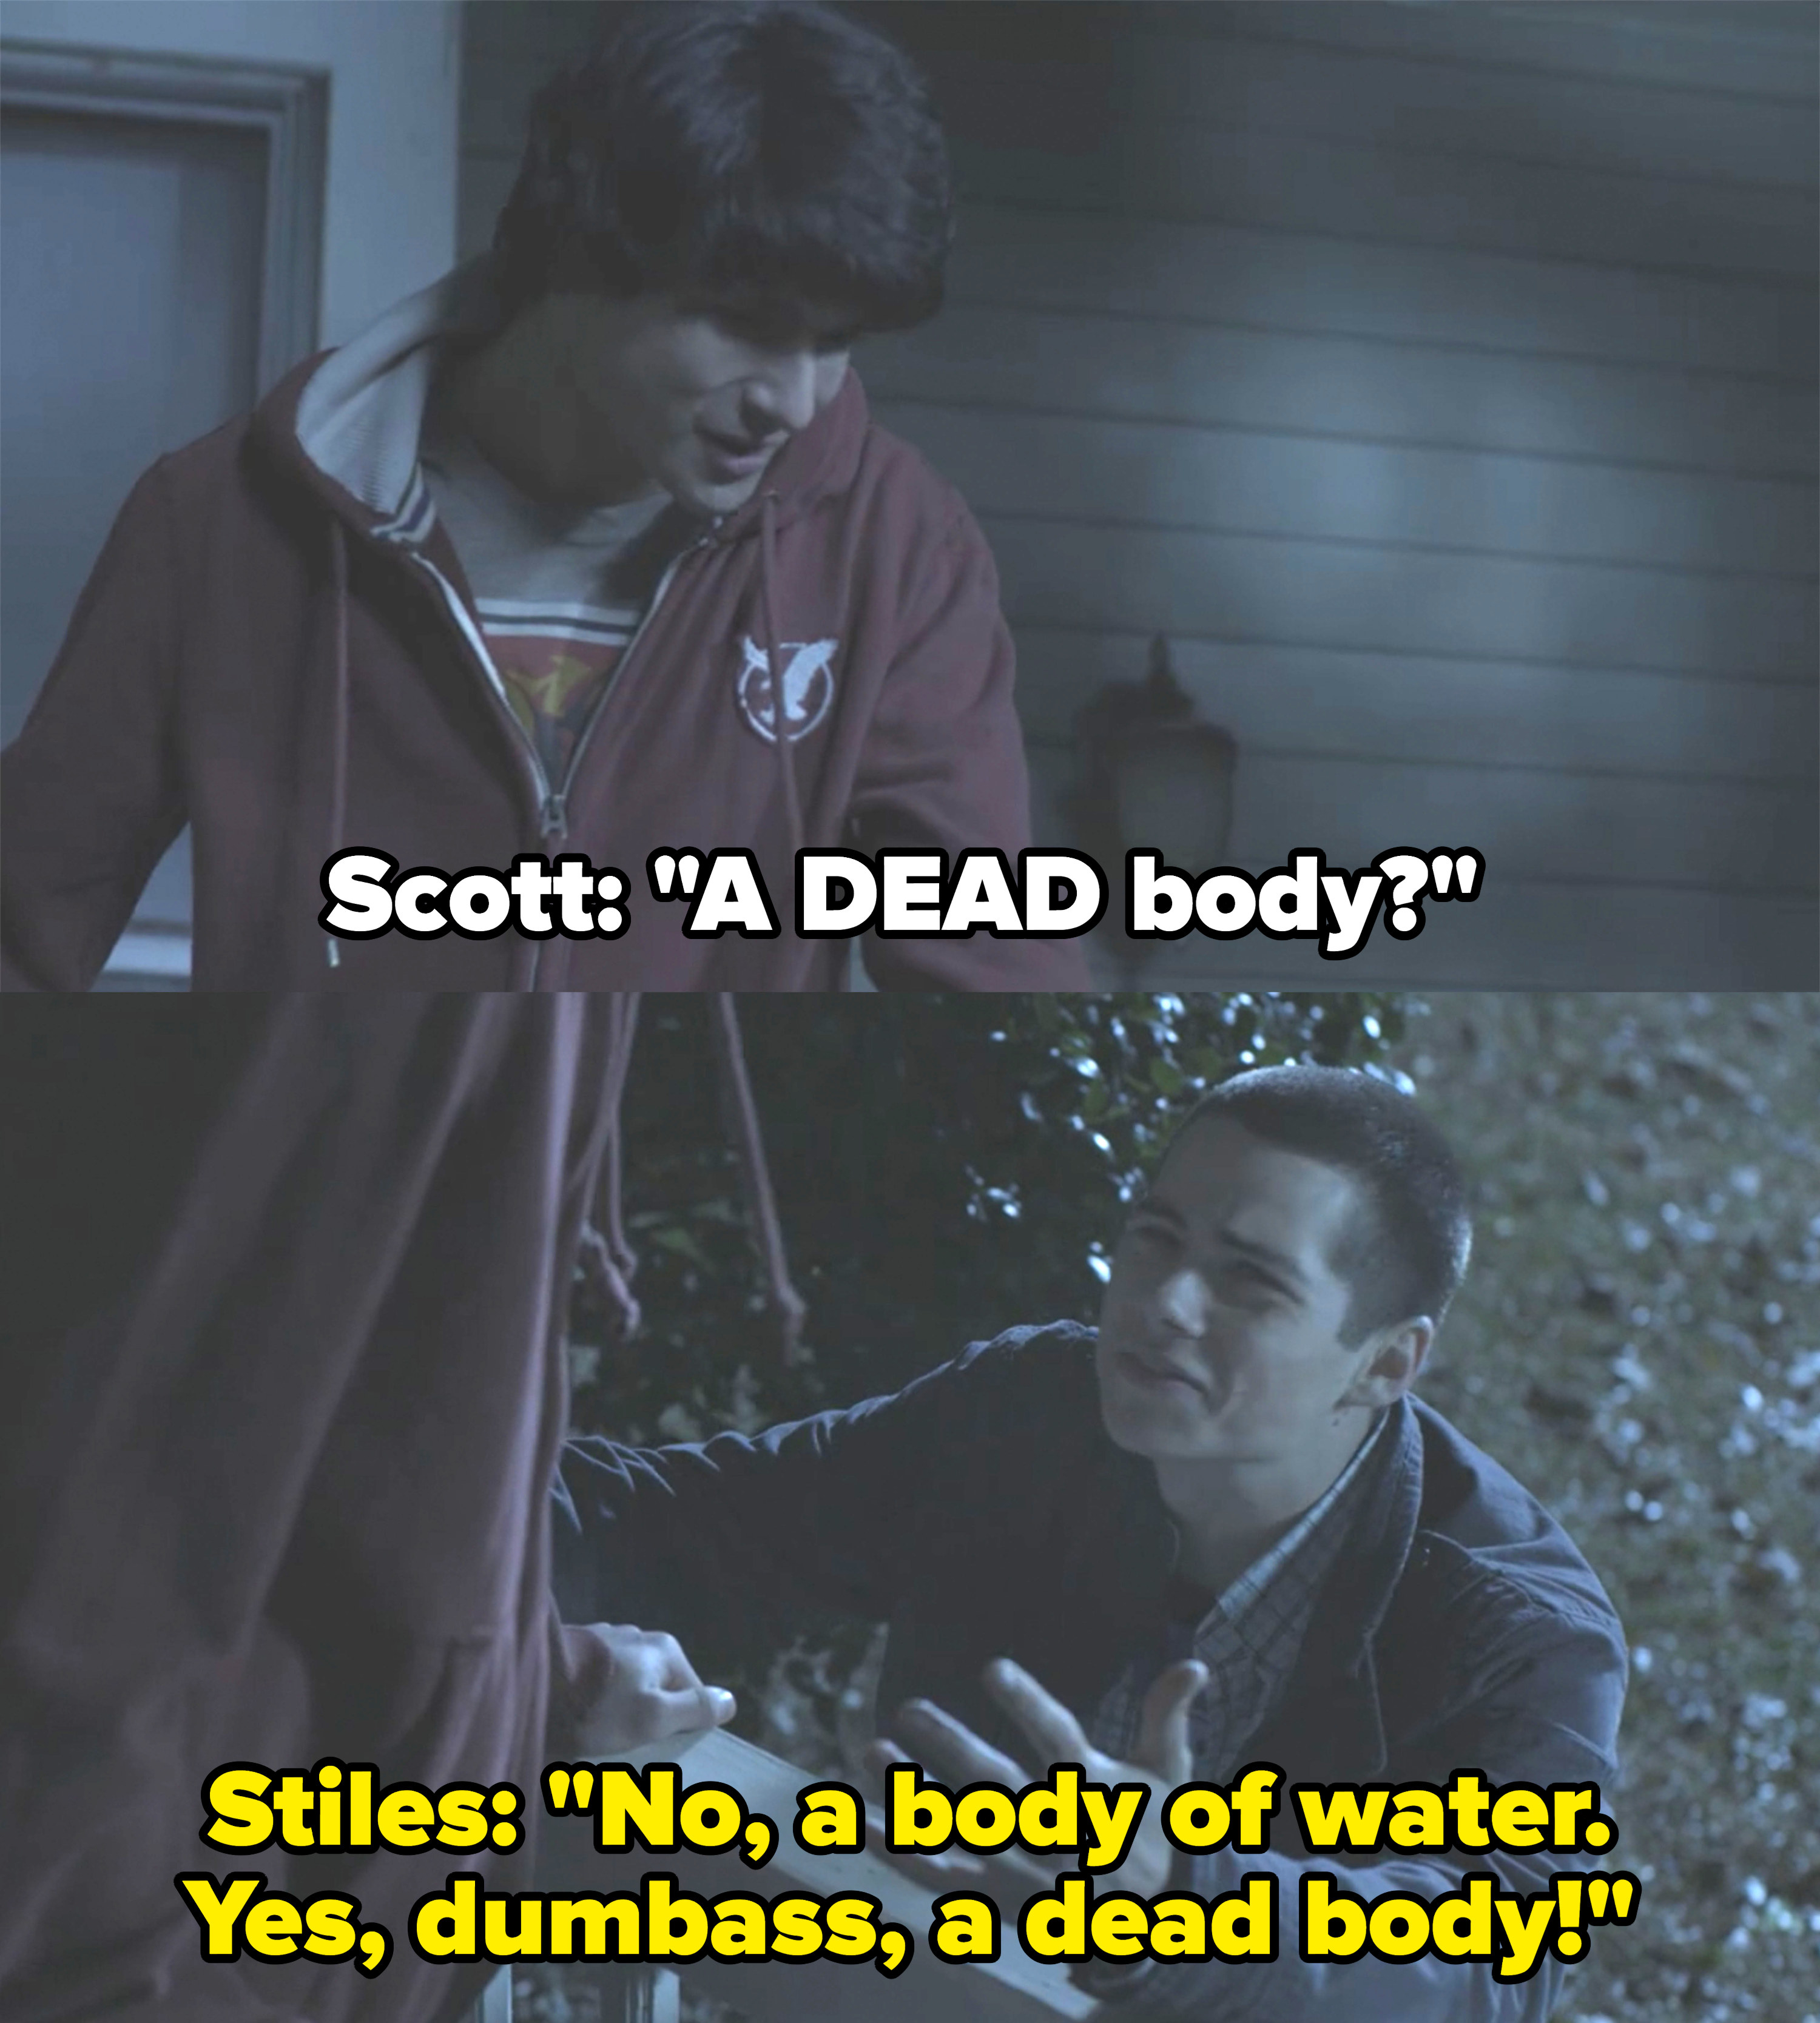 Scott asks if the body they found in the woods is a dead body and Stiles replies sarcastically, &quot;no, a body of water&quot;